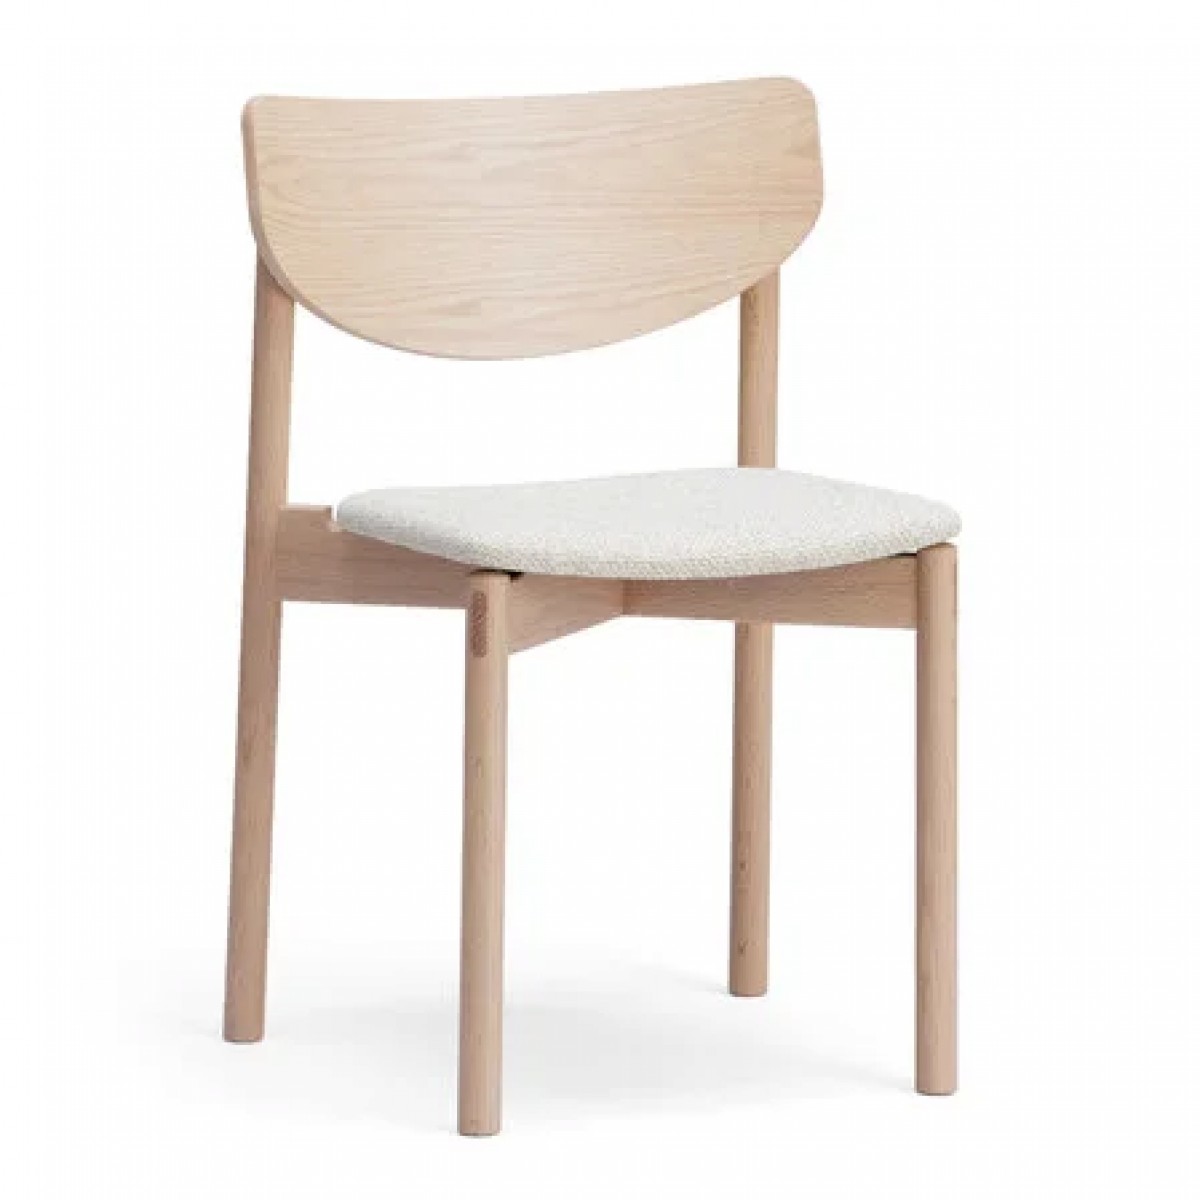 Hane Chair - Upholstered Seat